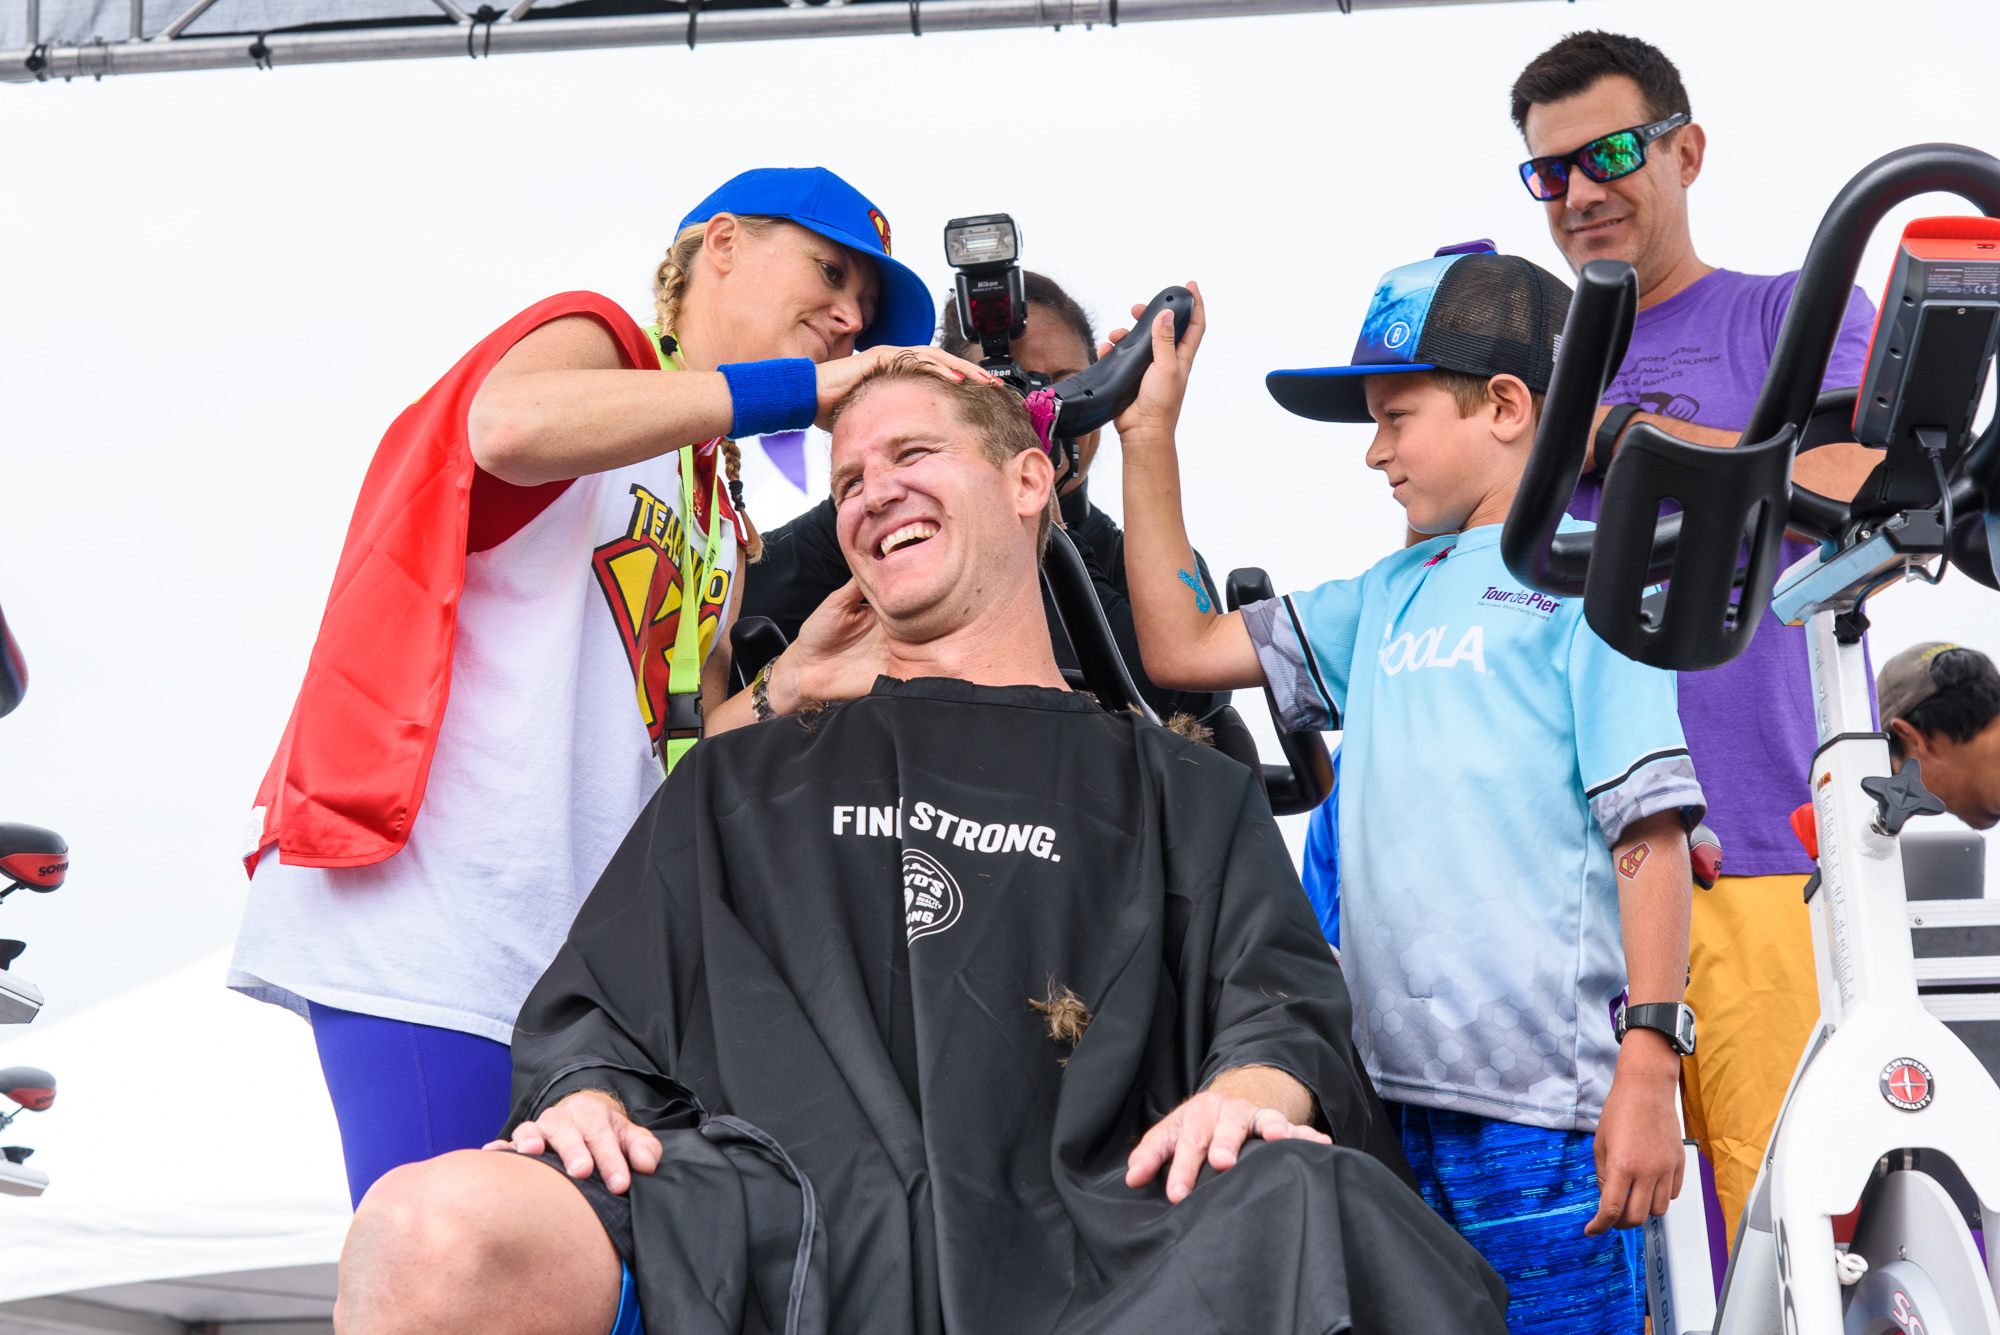 Chinny helping to shave co-founder Heath's head to celebrate breaking $1 million fundraised in 2016!